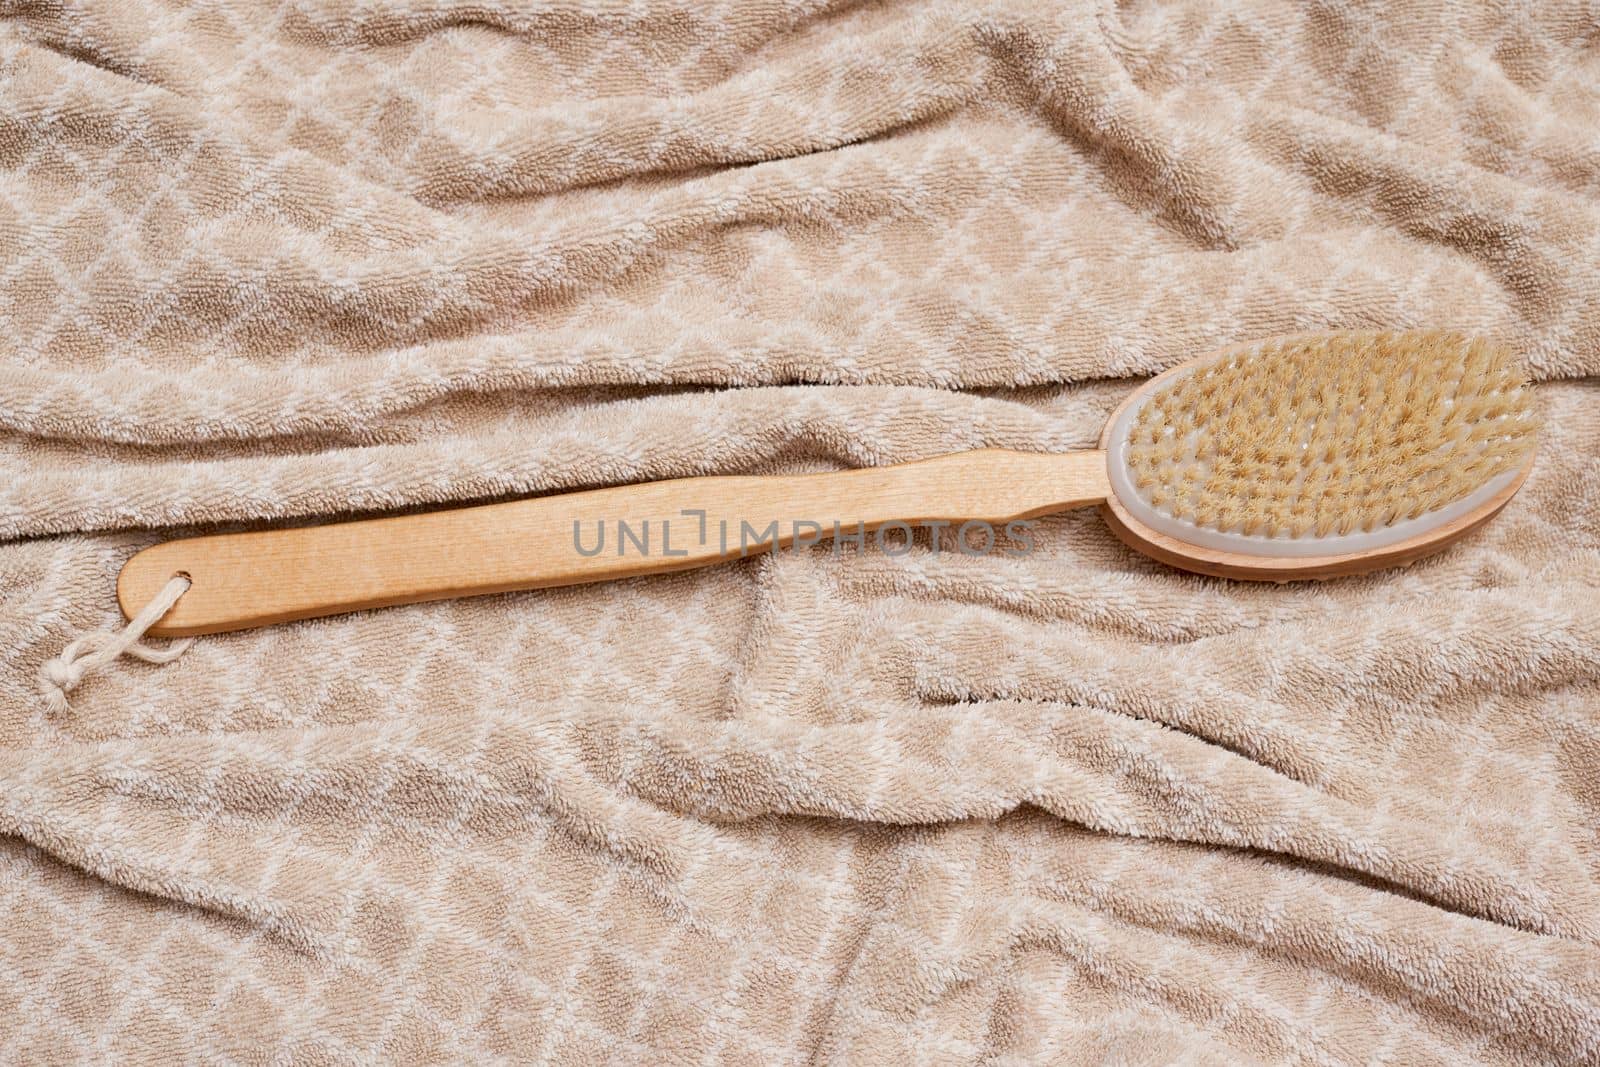 a wooden tooth brush on a bed with a white and beige blanket in the background, as seen from above